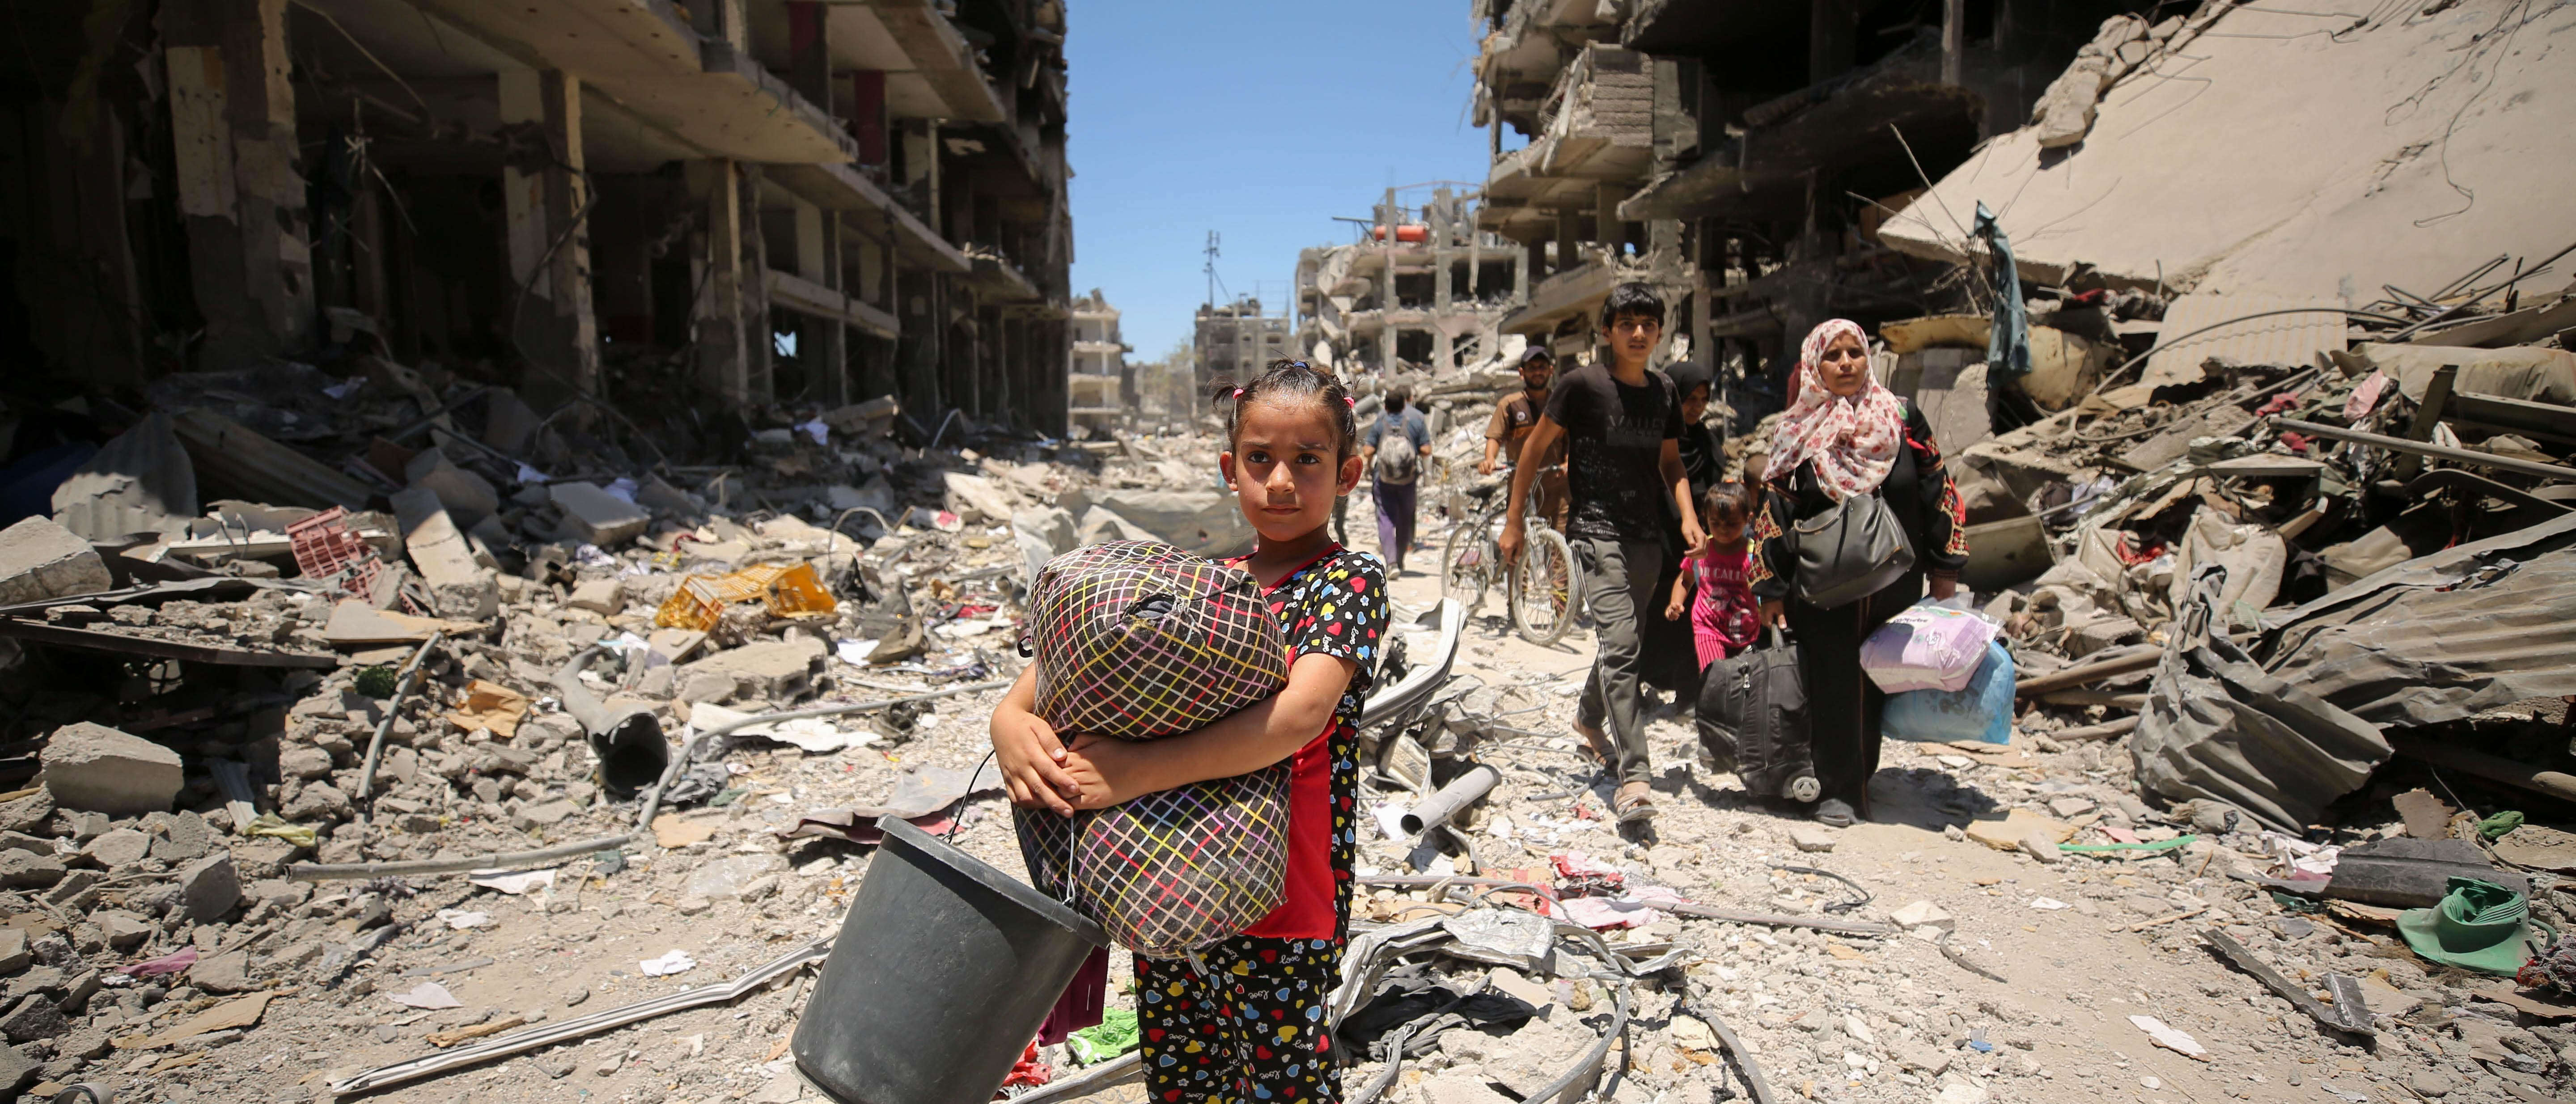 Young girl stands amongst rubble in Gaza.